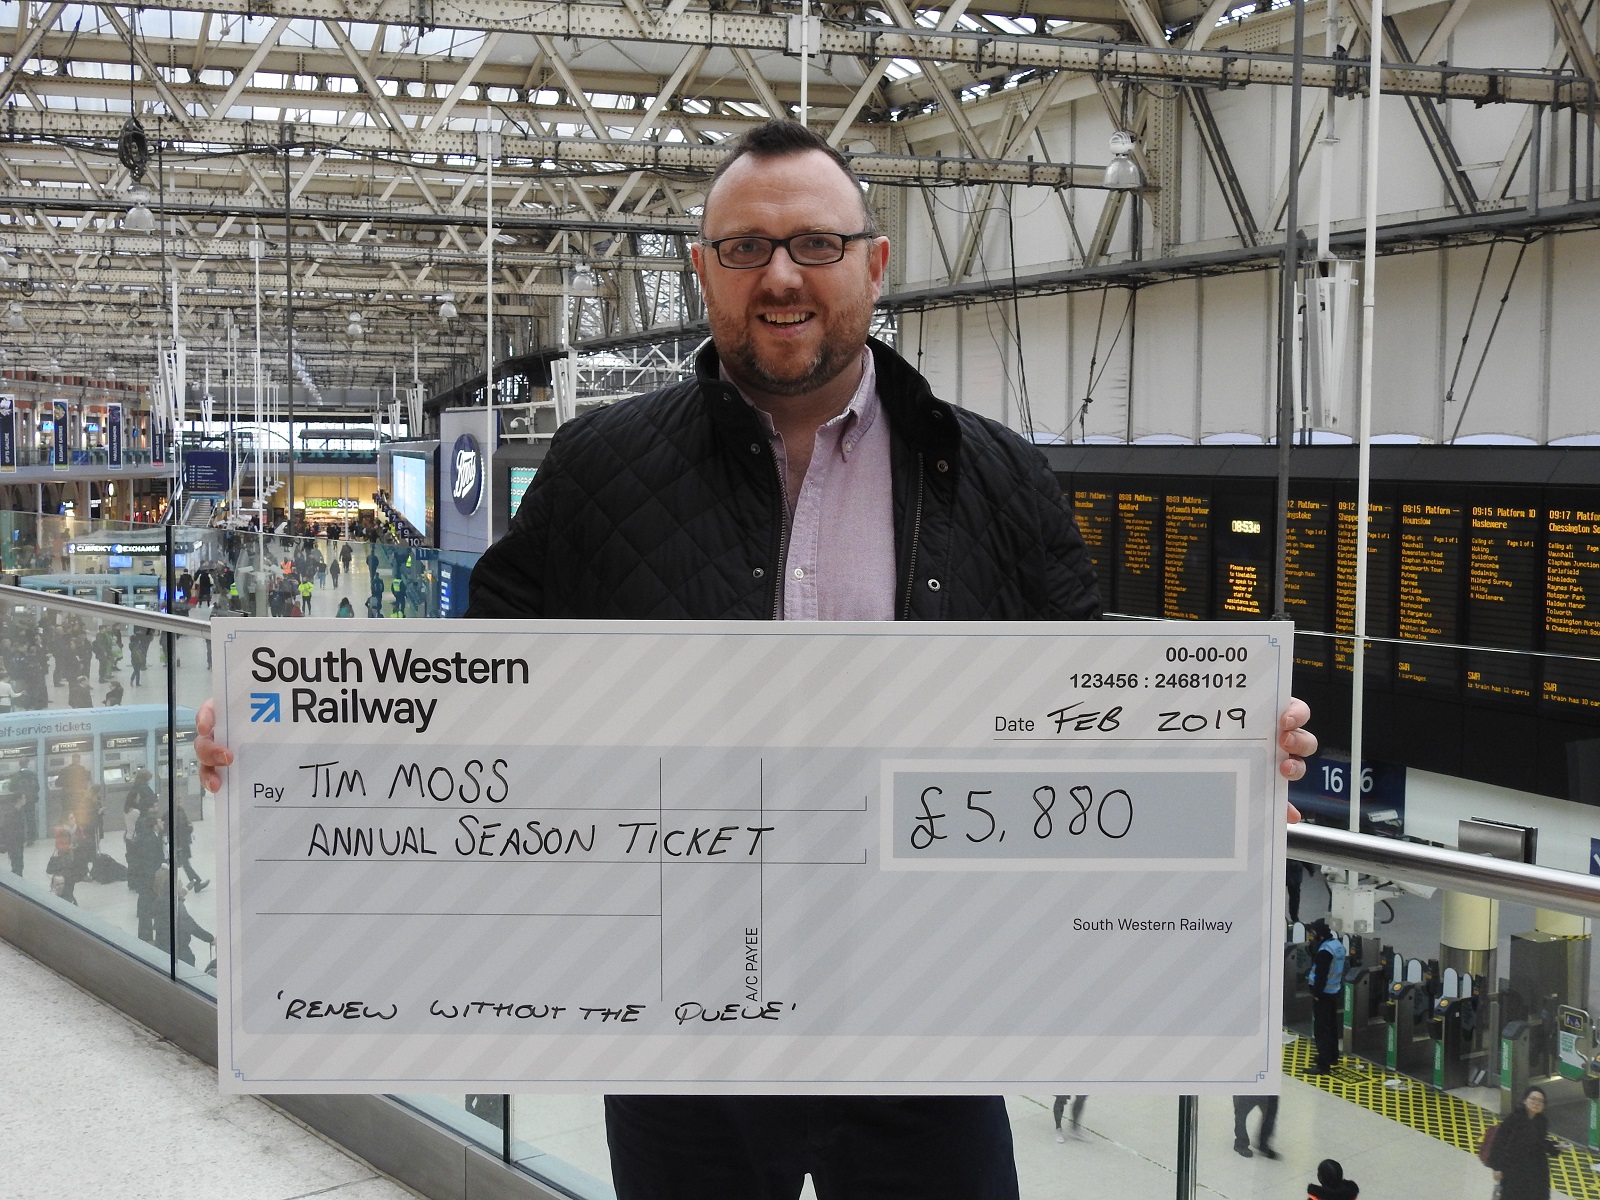 Tim Moss, SWR Passenger & Renew without the Queue winner